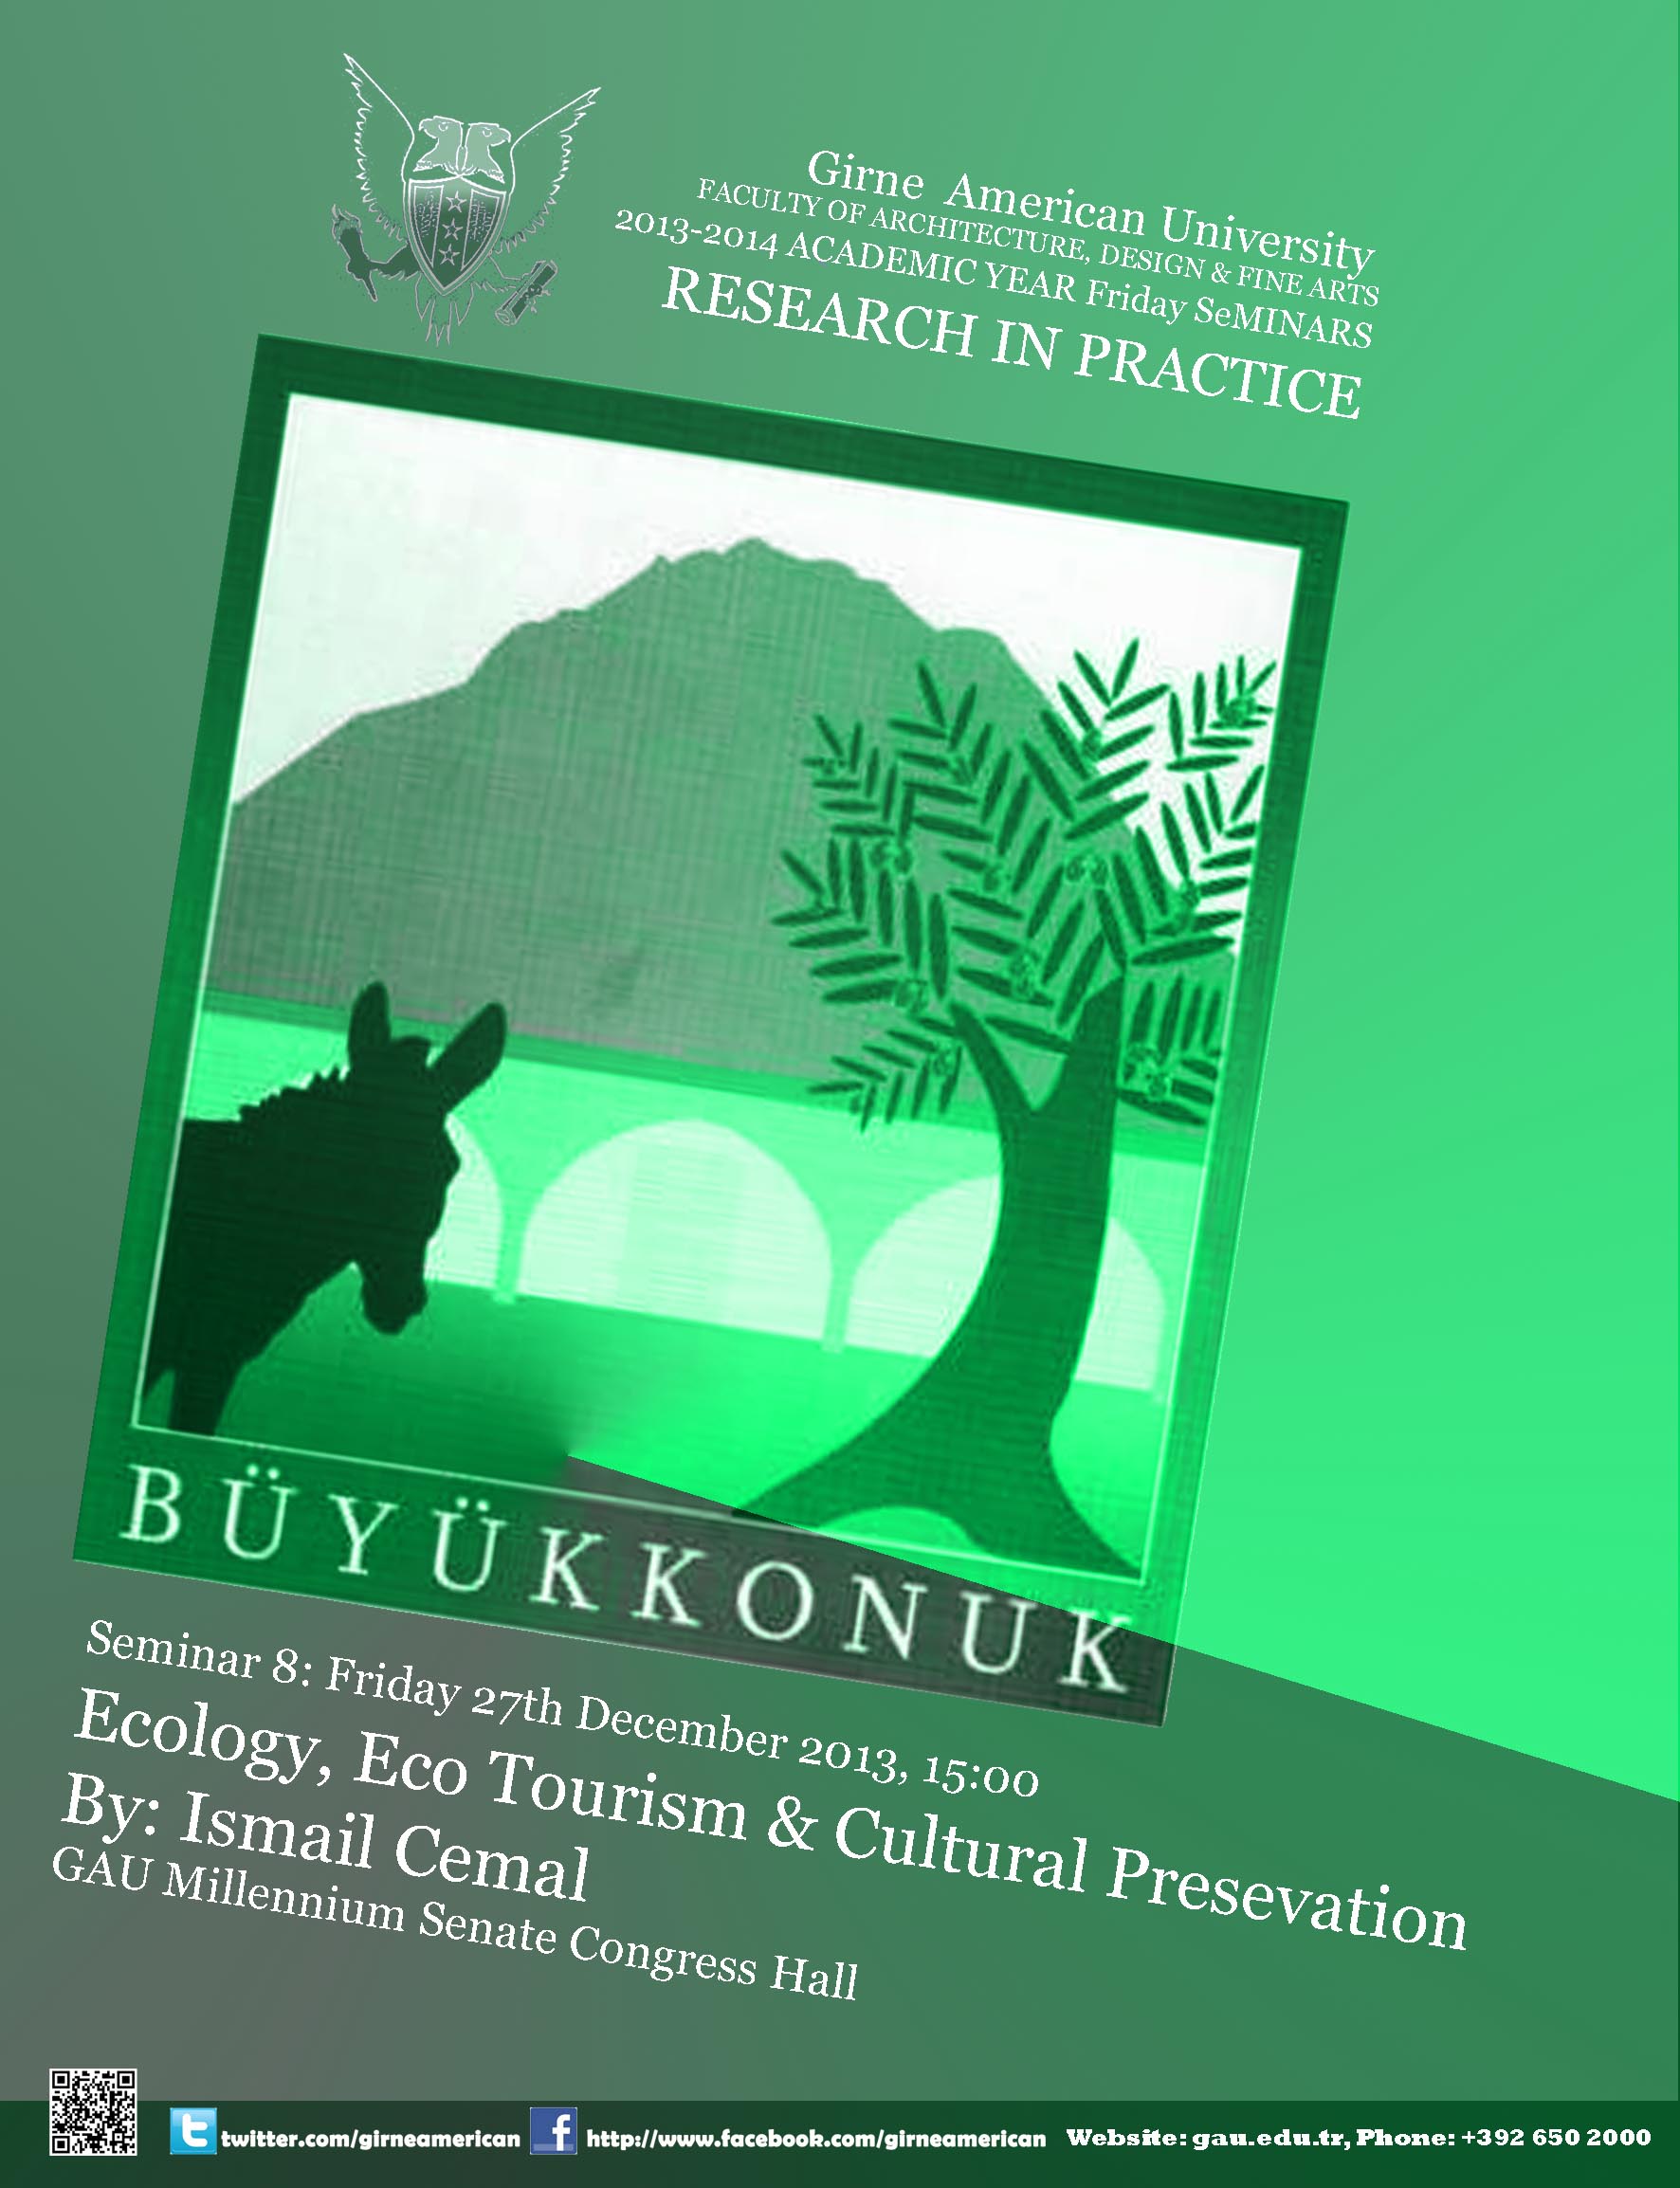 8th Friday Seminar: Ecology, Eco-Tourism & Cultural Preservation